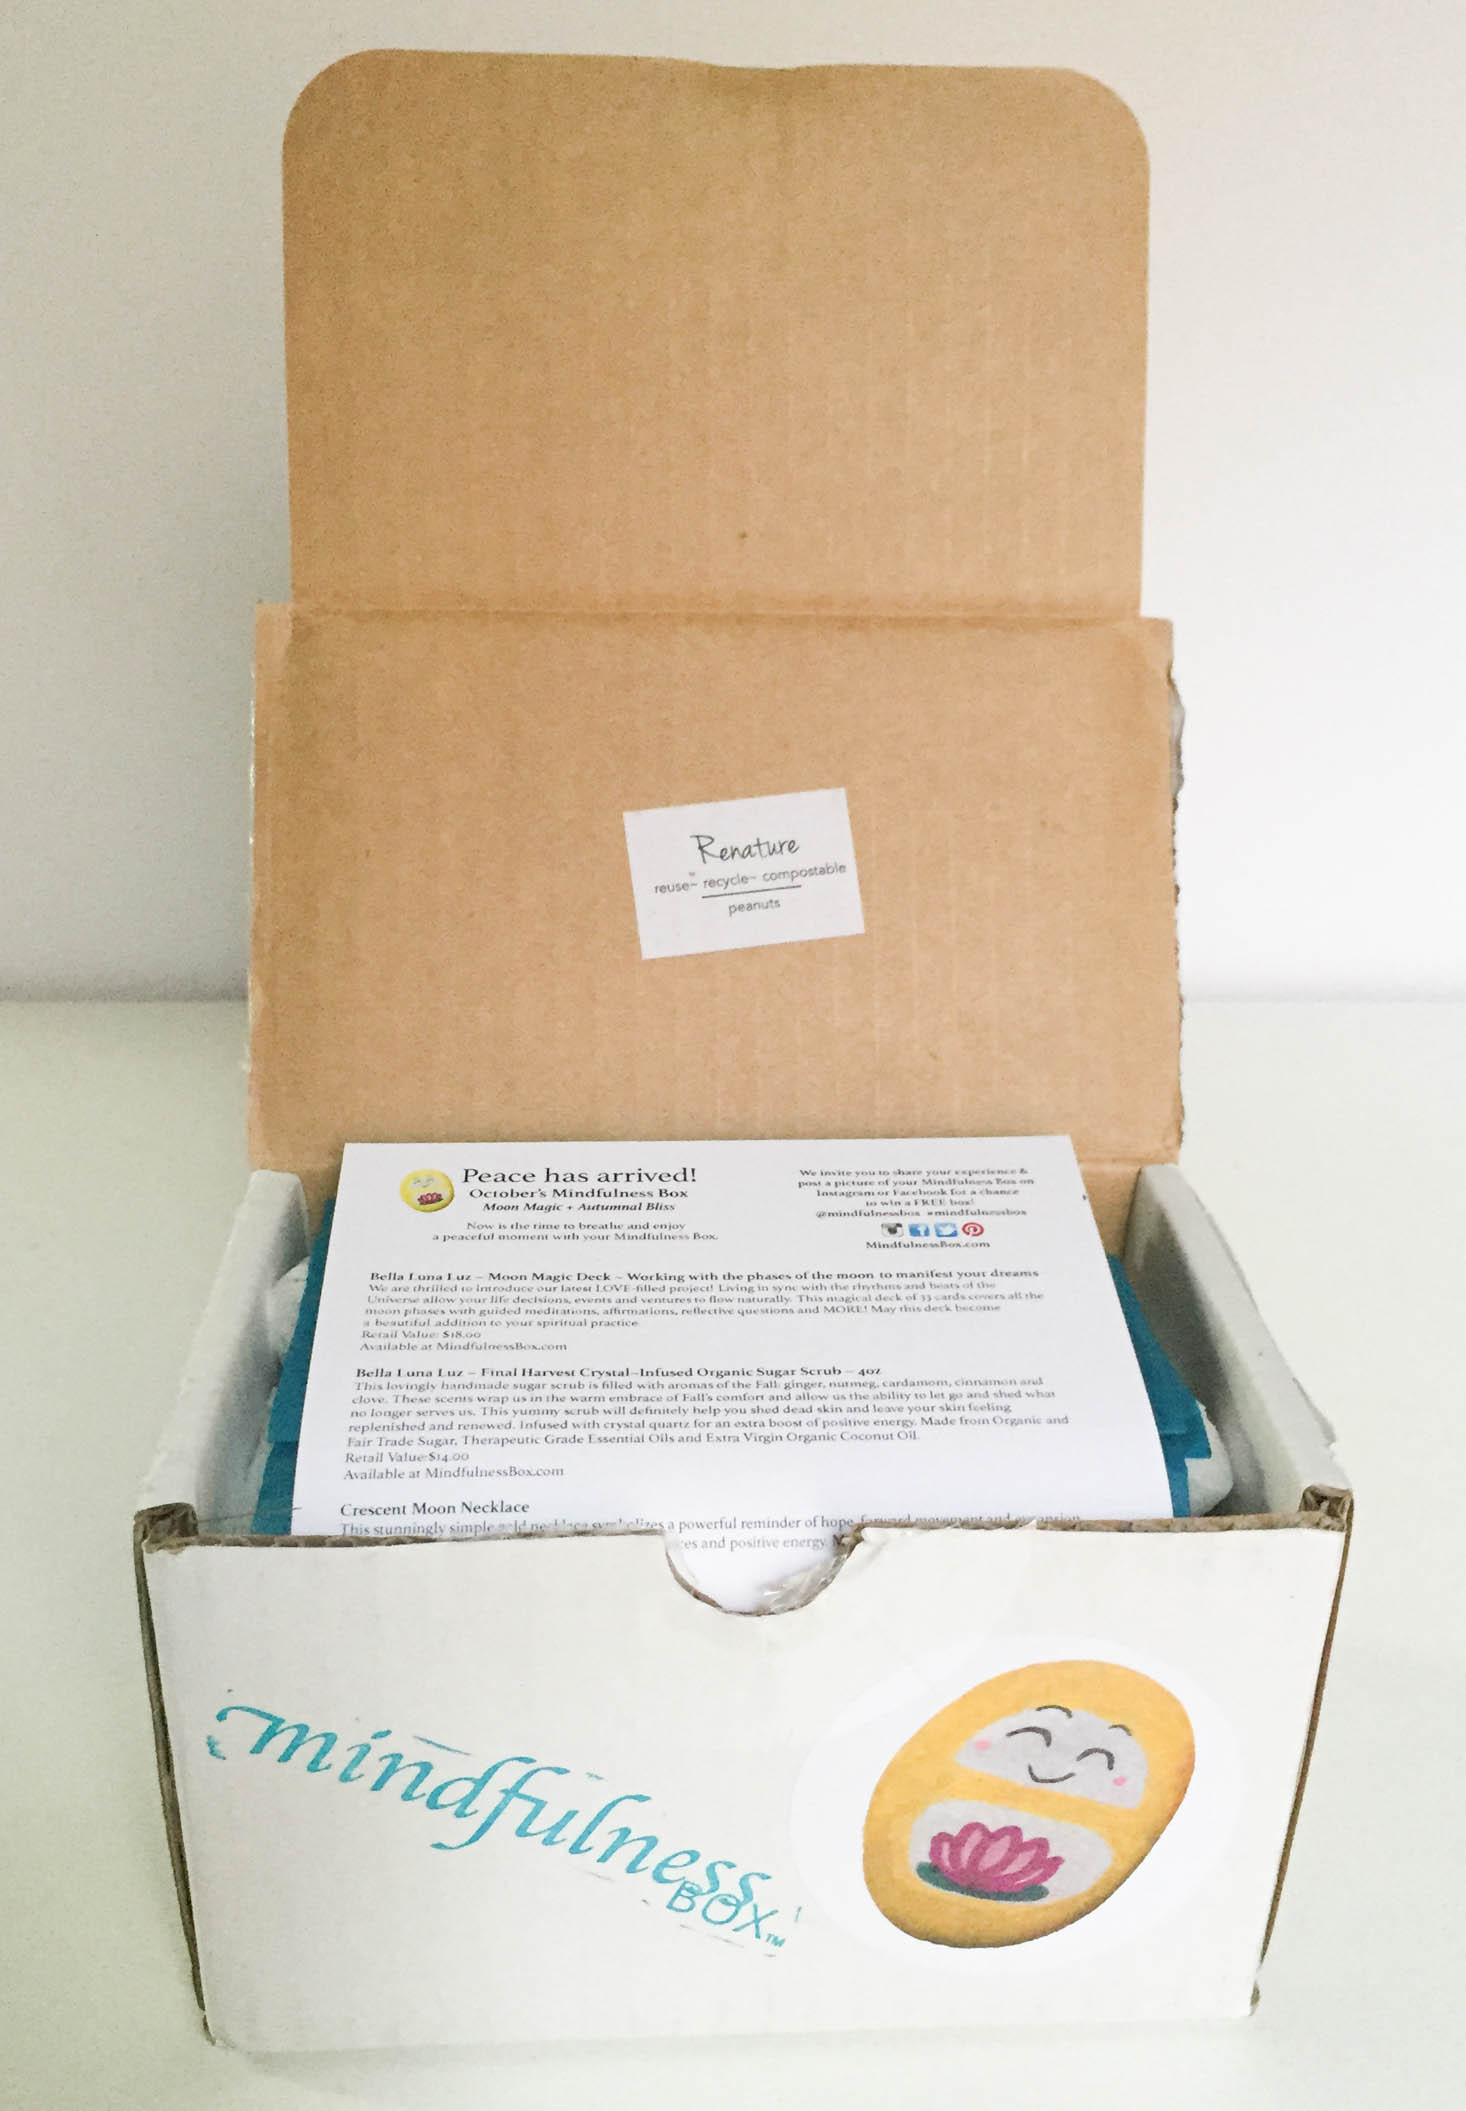 Mindfulness Box Subscription Review + Coupon– October 2016